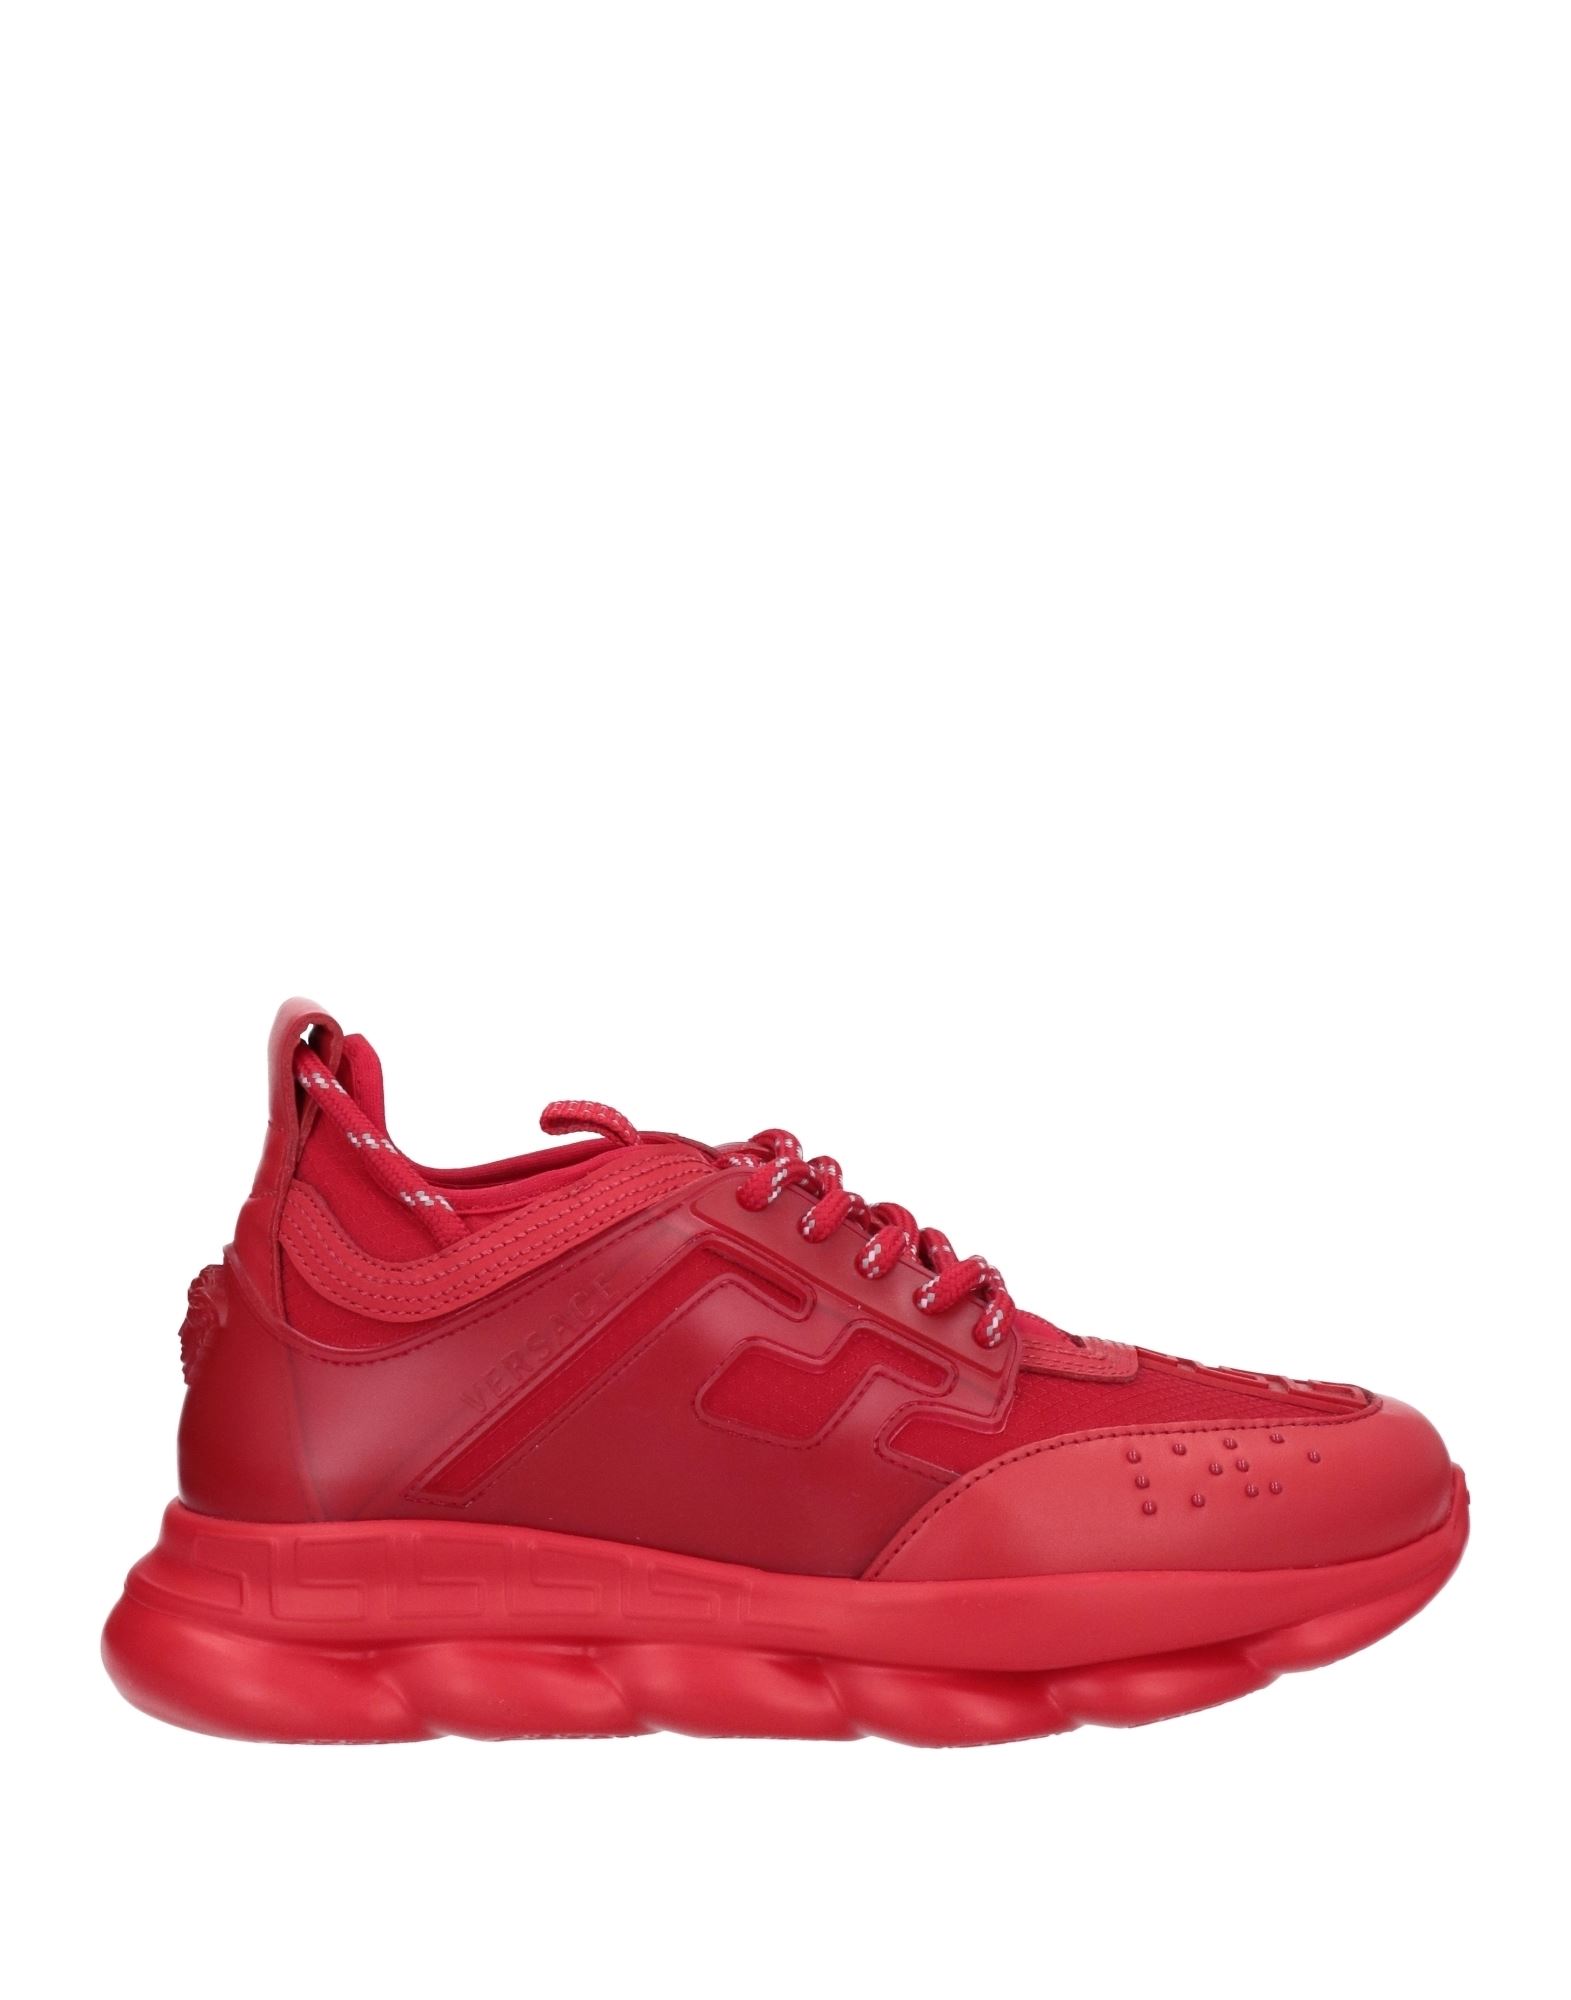 VERSACE YOUNG Sneakers Kinder Rot von VERSACE YOUNG